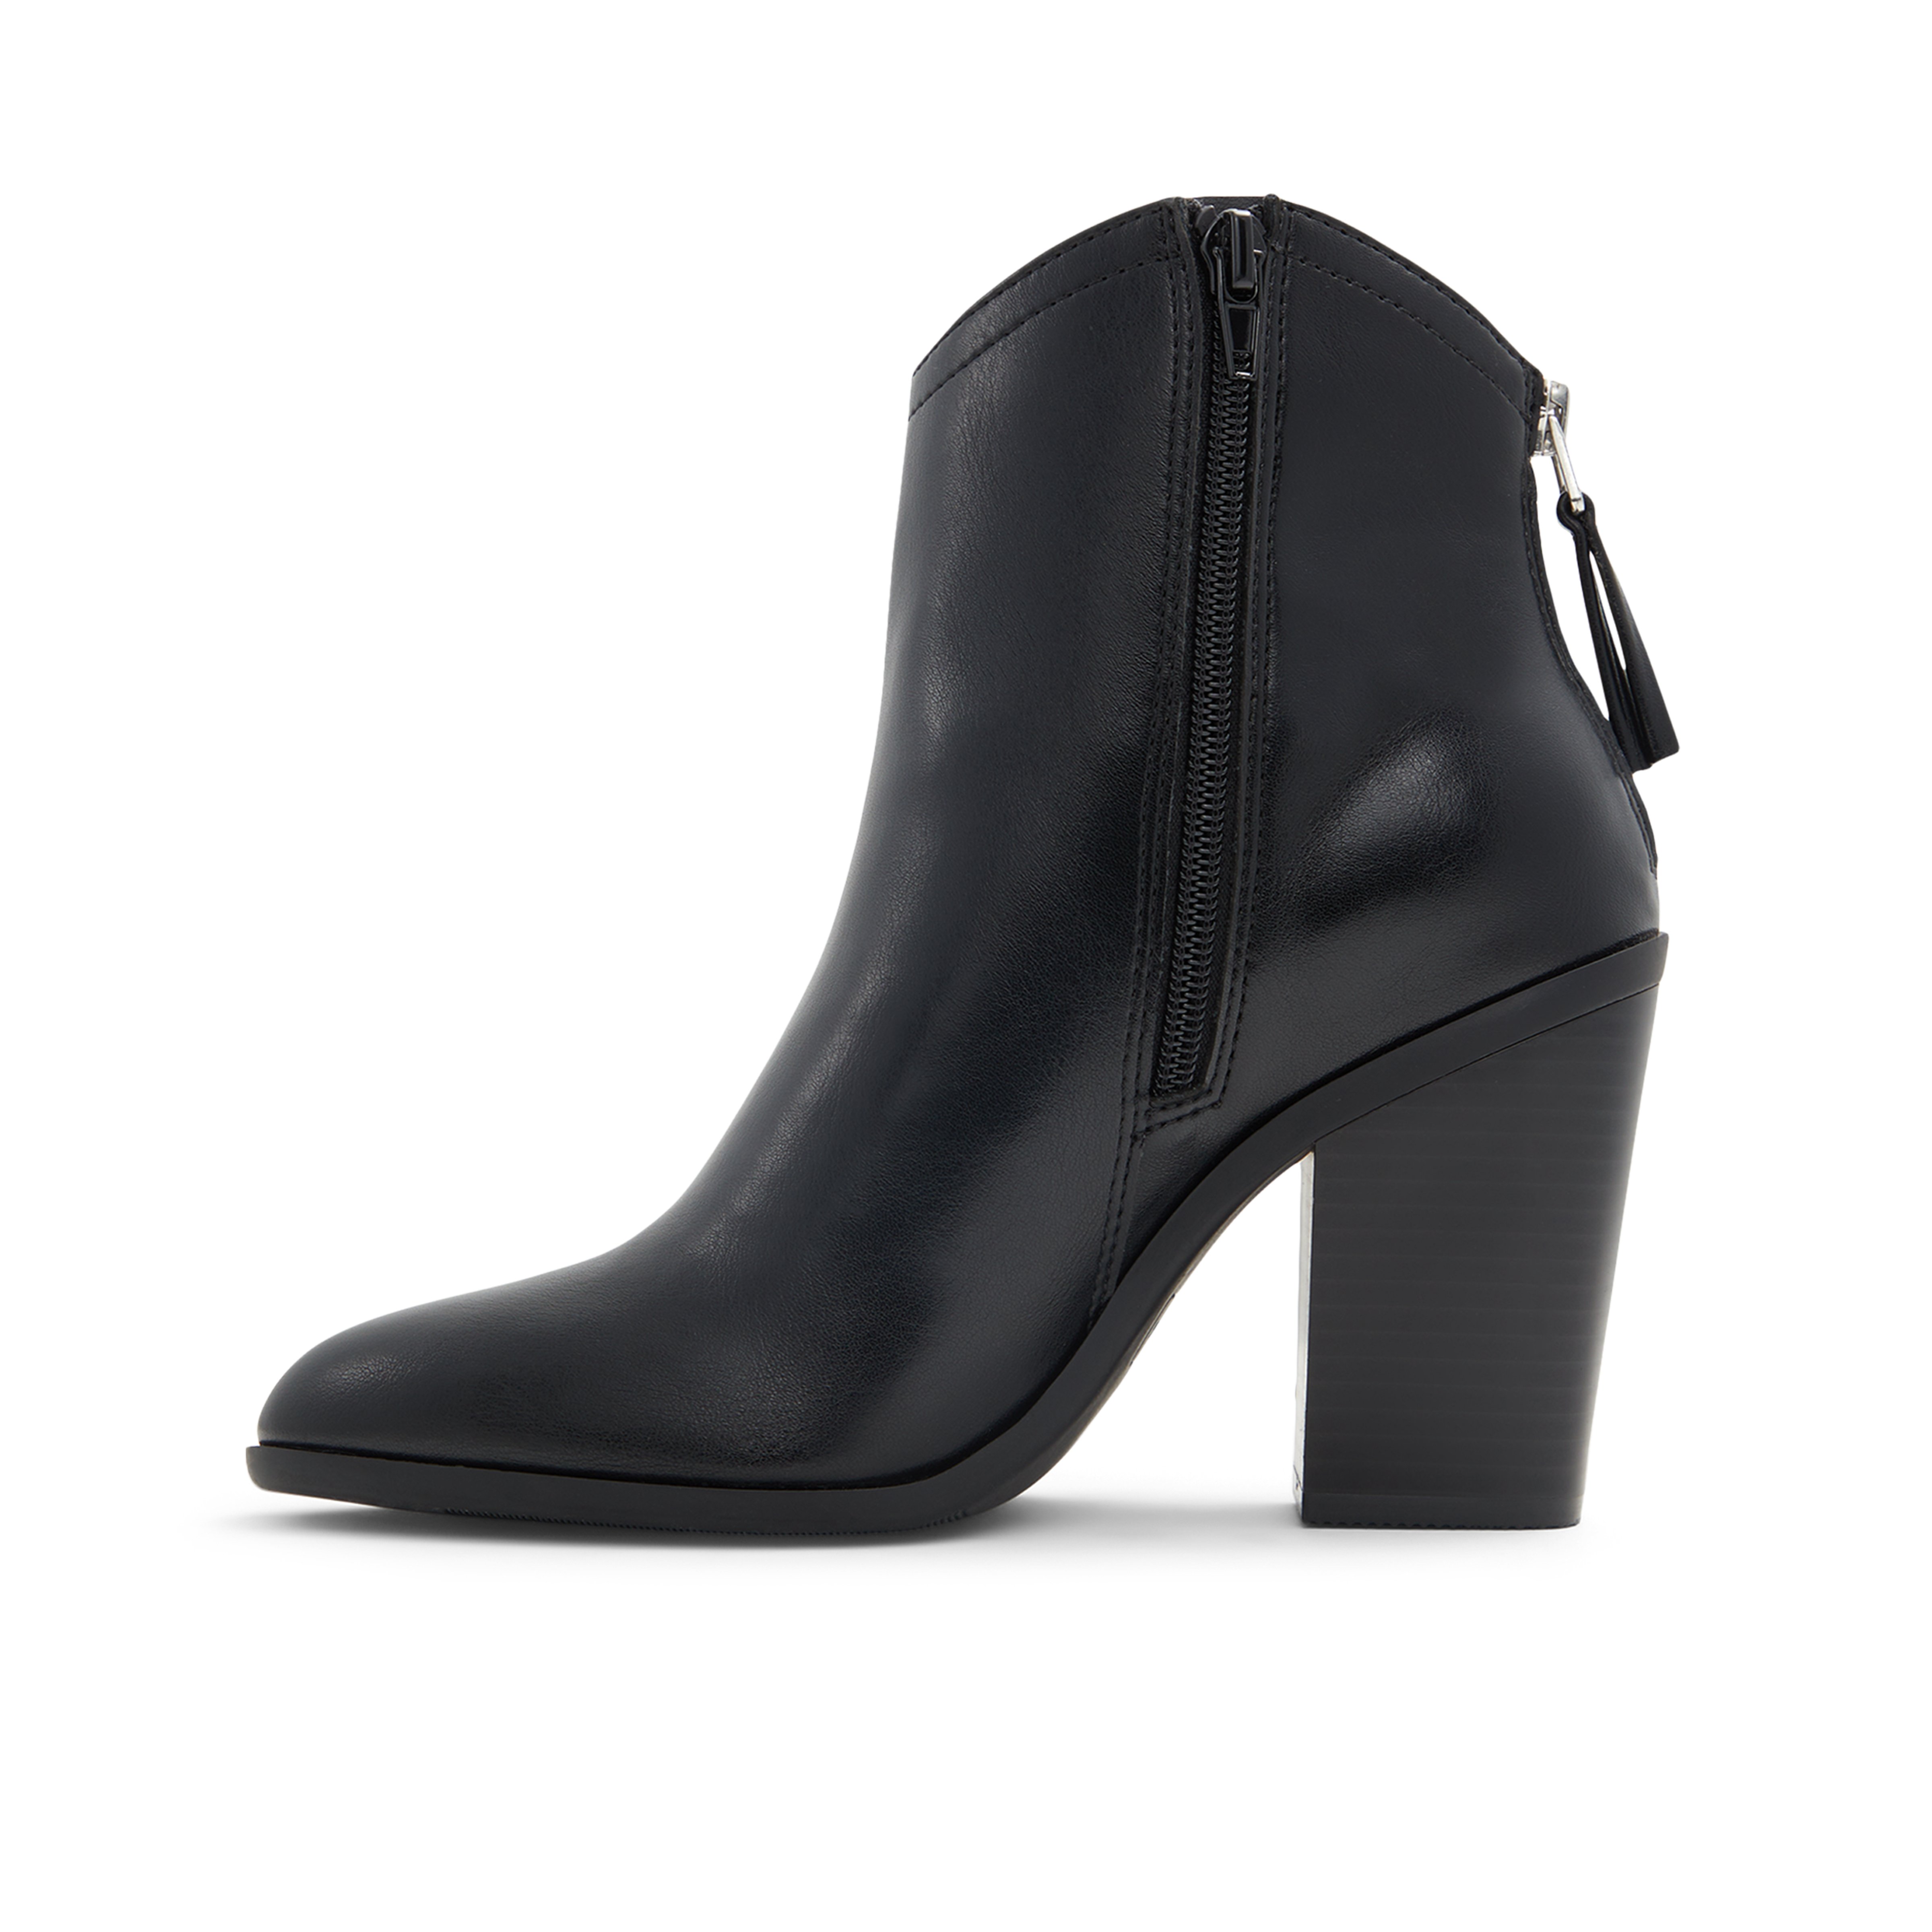 Austyn Black Women's Ankle Boots | Call It Spring Canada